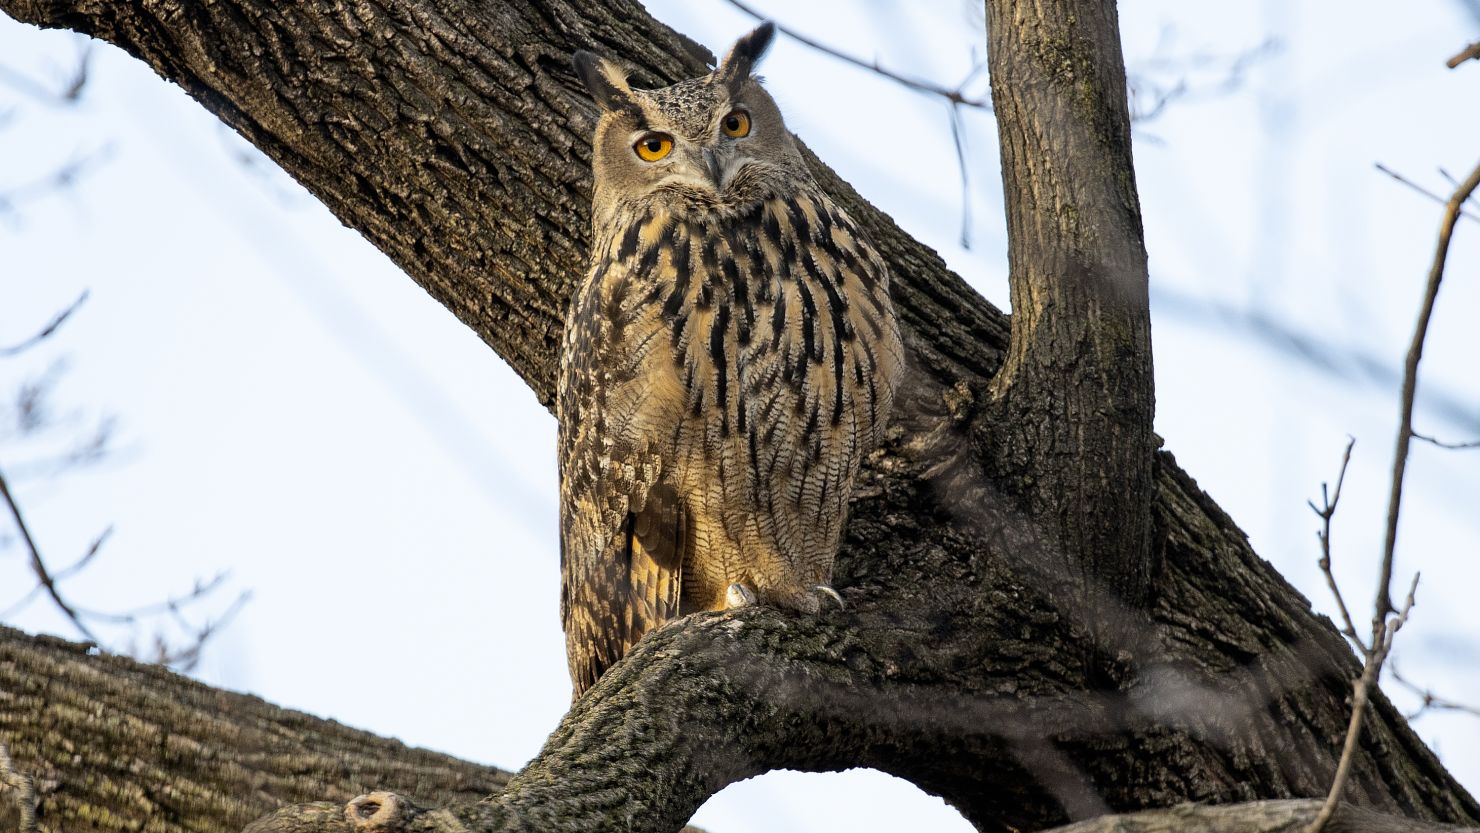 Flaco, a Eurasian eagle-owl who escaped from the Central Park Zoo, died in February after flying into a building. A necropsy found potentially lethal amounts of rodenticide in his body.